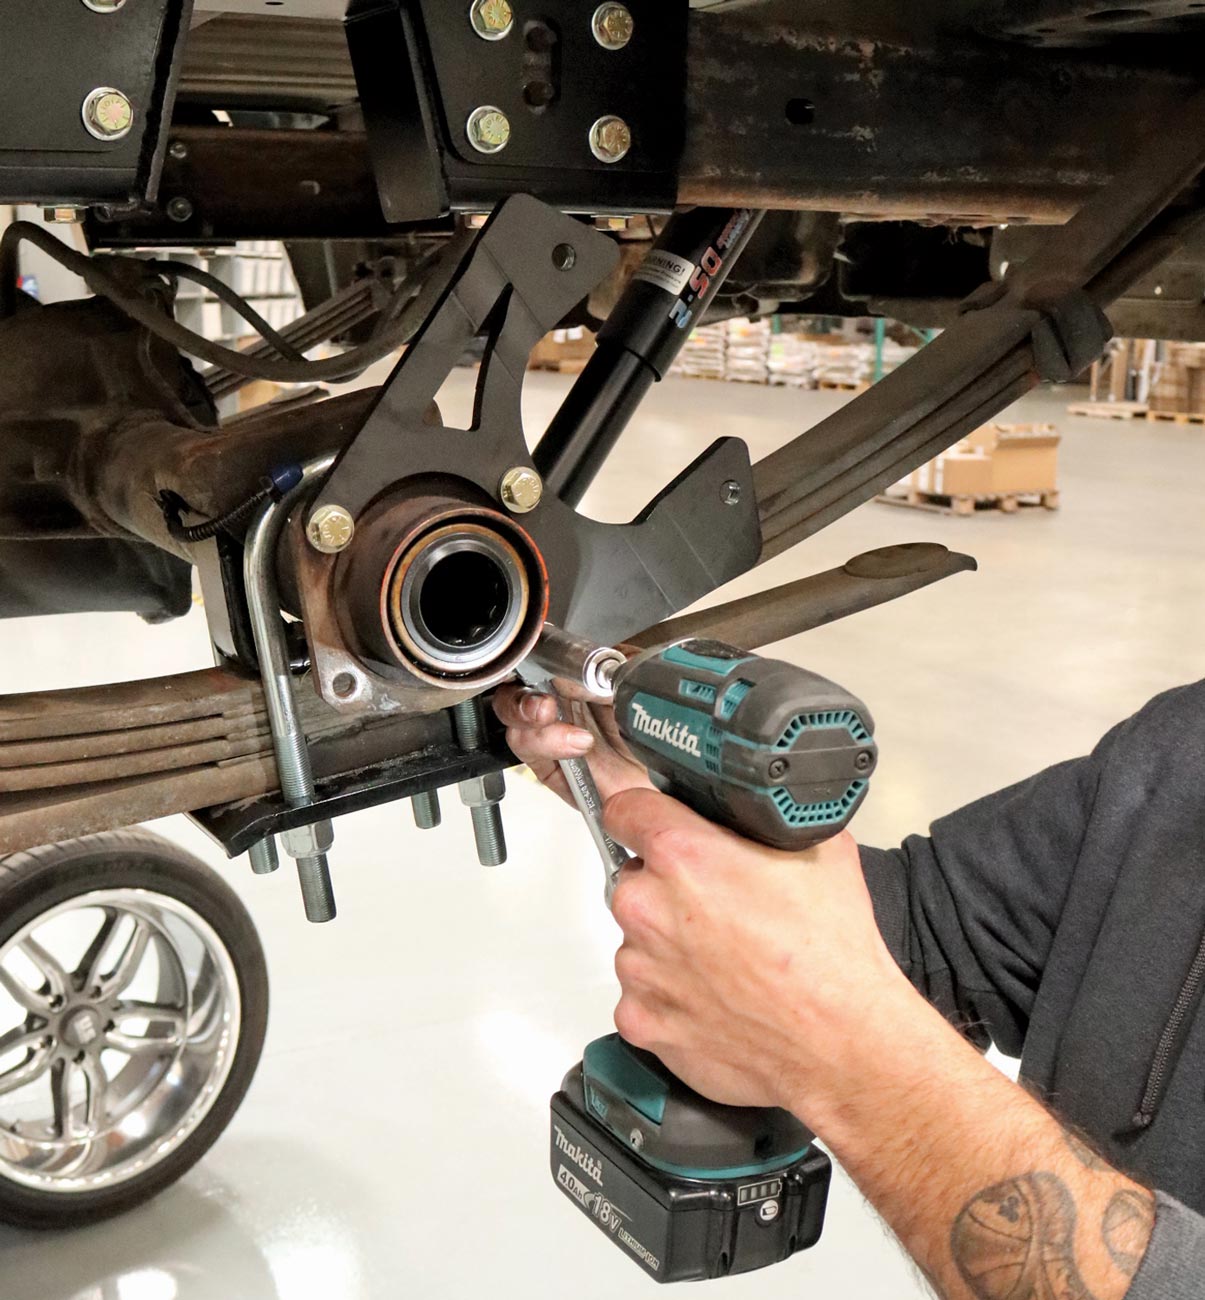 mechanic uses a drille to tighten a nut on the axle